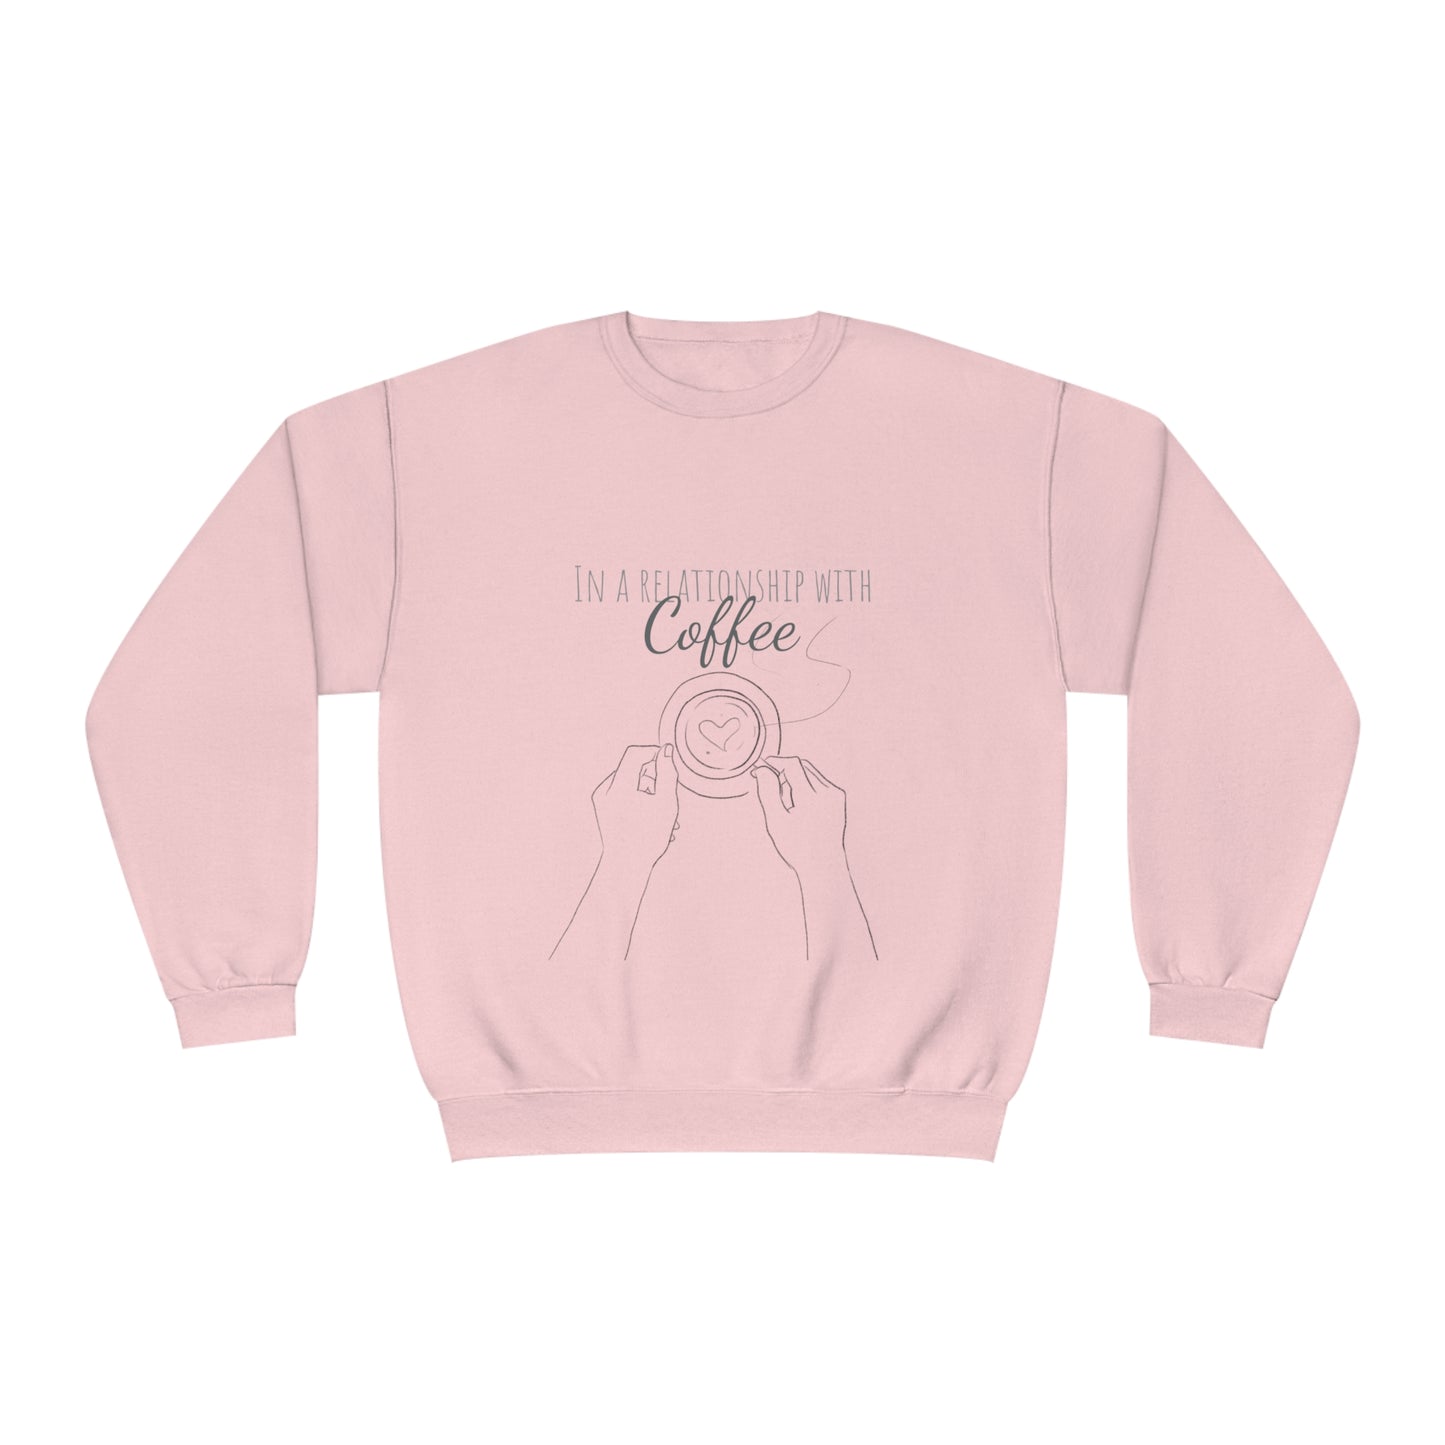 In a relationship with COFFEE Sweatshirt - Coffee sweater - Coffee Sweatshirt - Cozy Coffee Clothing